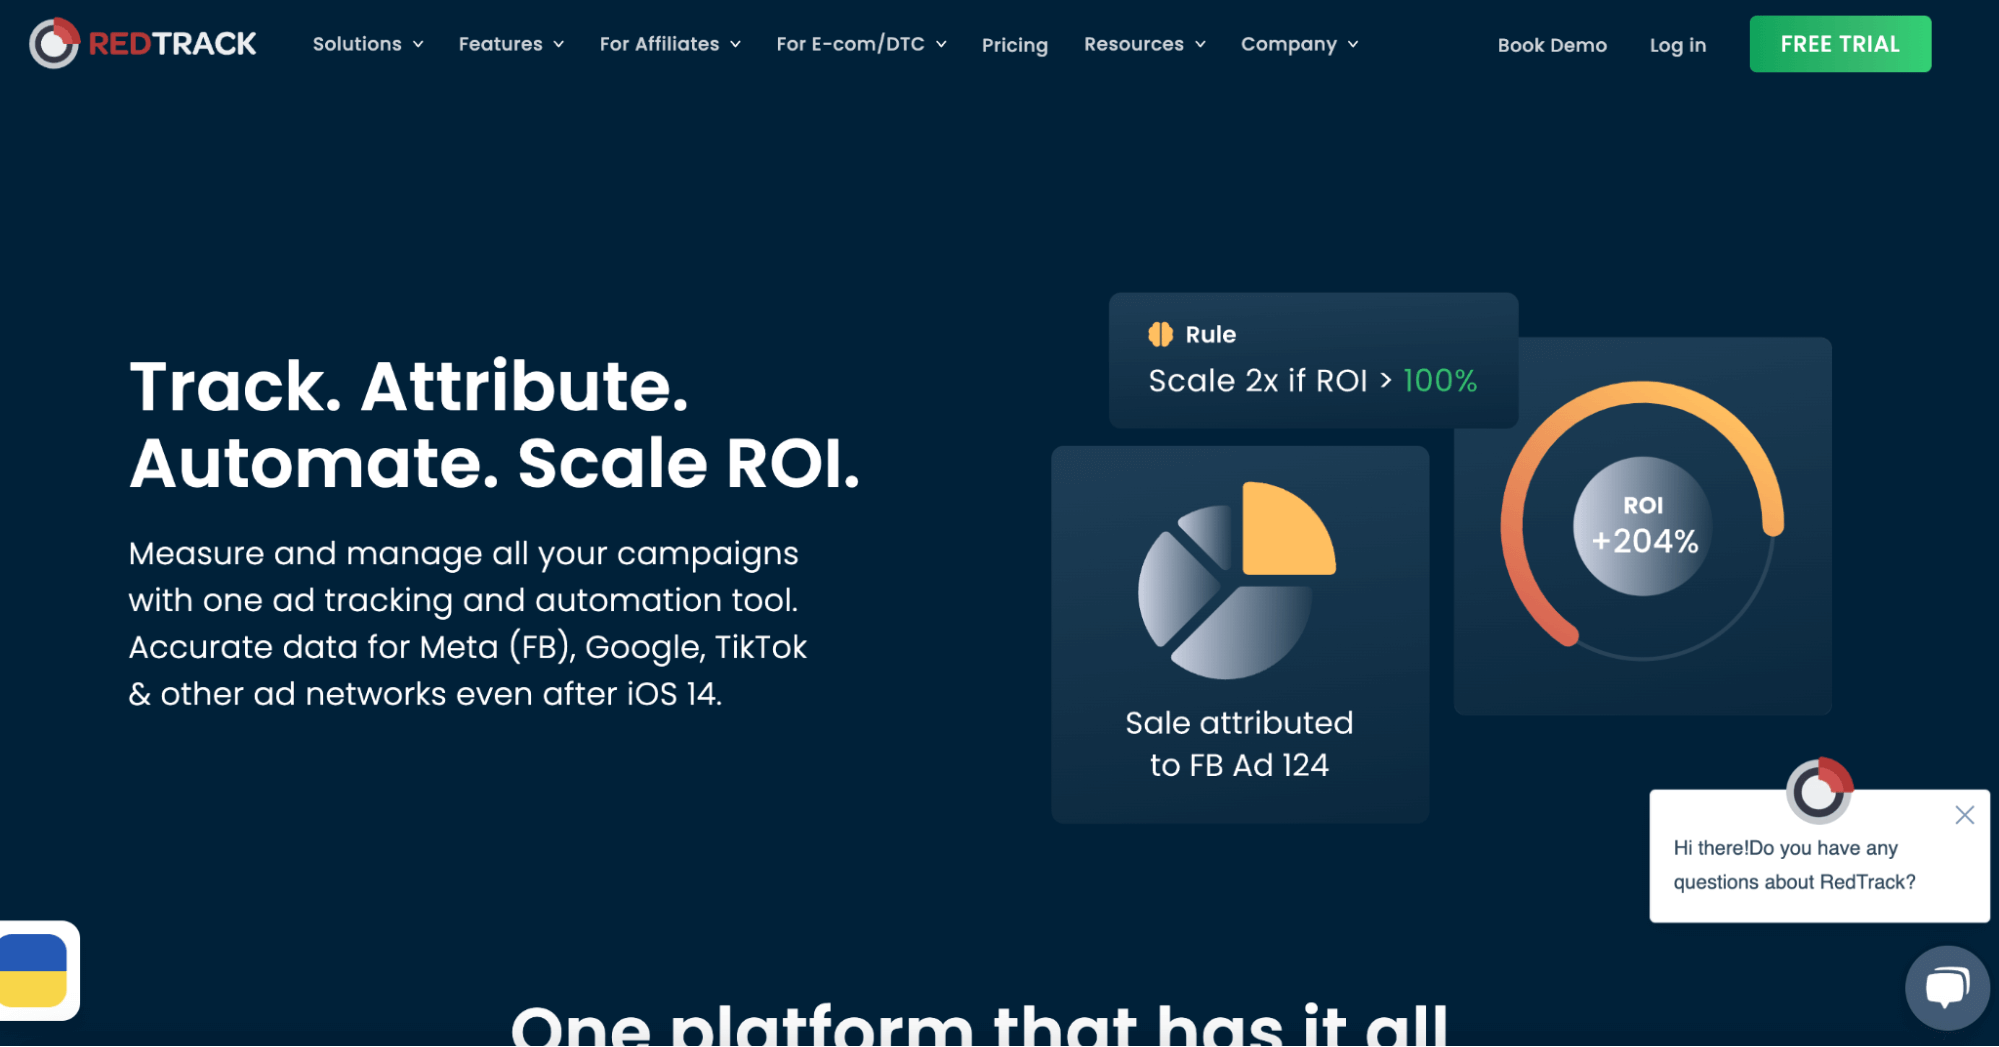 The image shows the homepage for RedTrack.io with the headline, “Track. Attribute. Automate. Scale ROI.” The other half of the webpage shows examples of simple graphs and images displaying an increase in ROI.